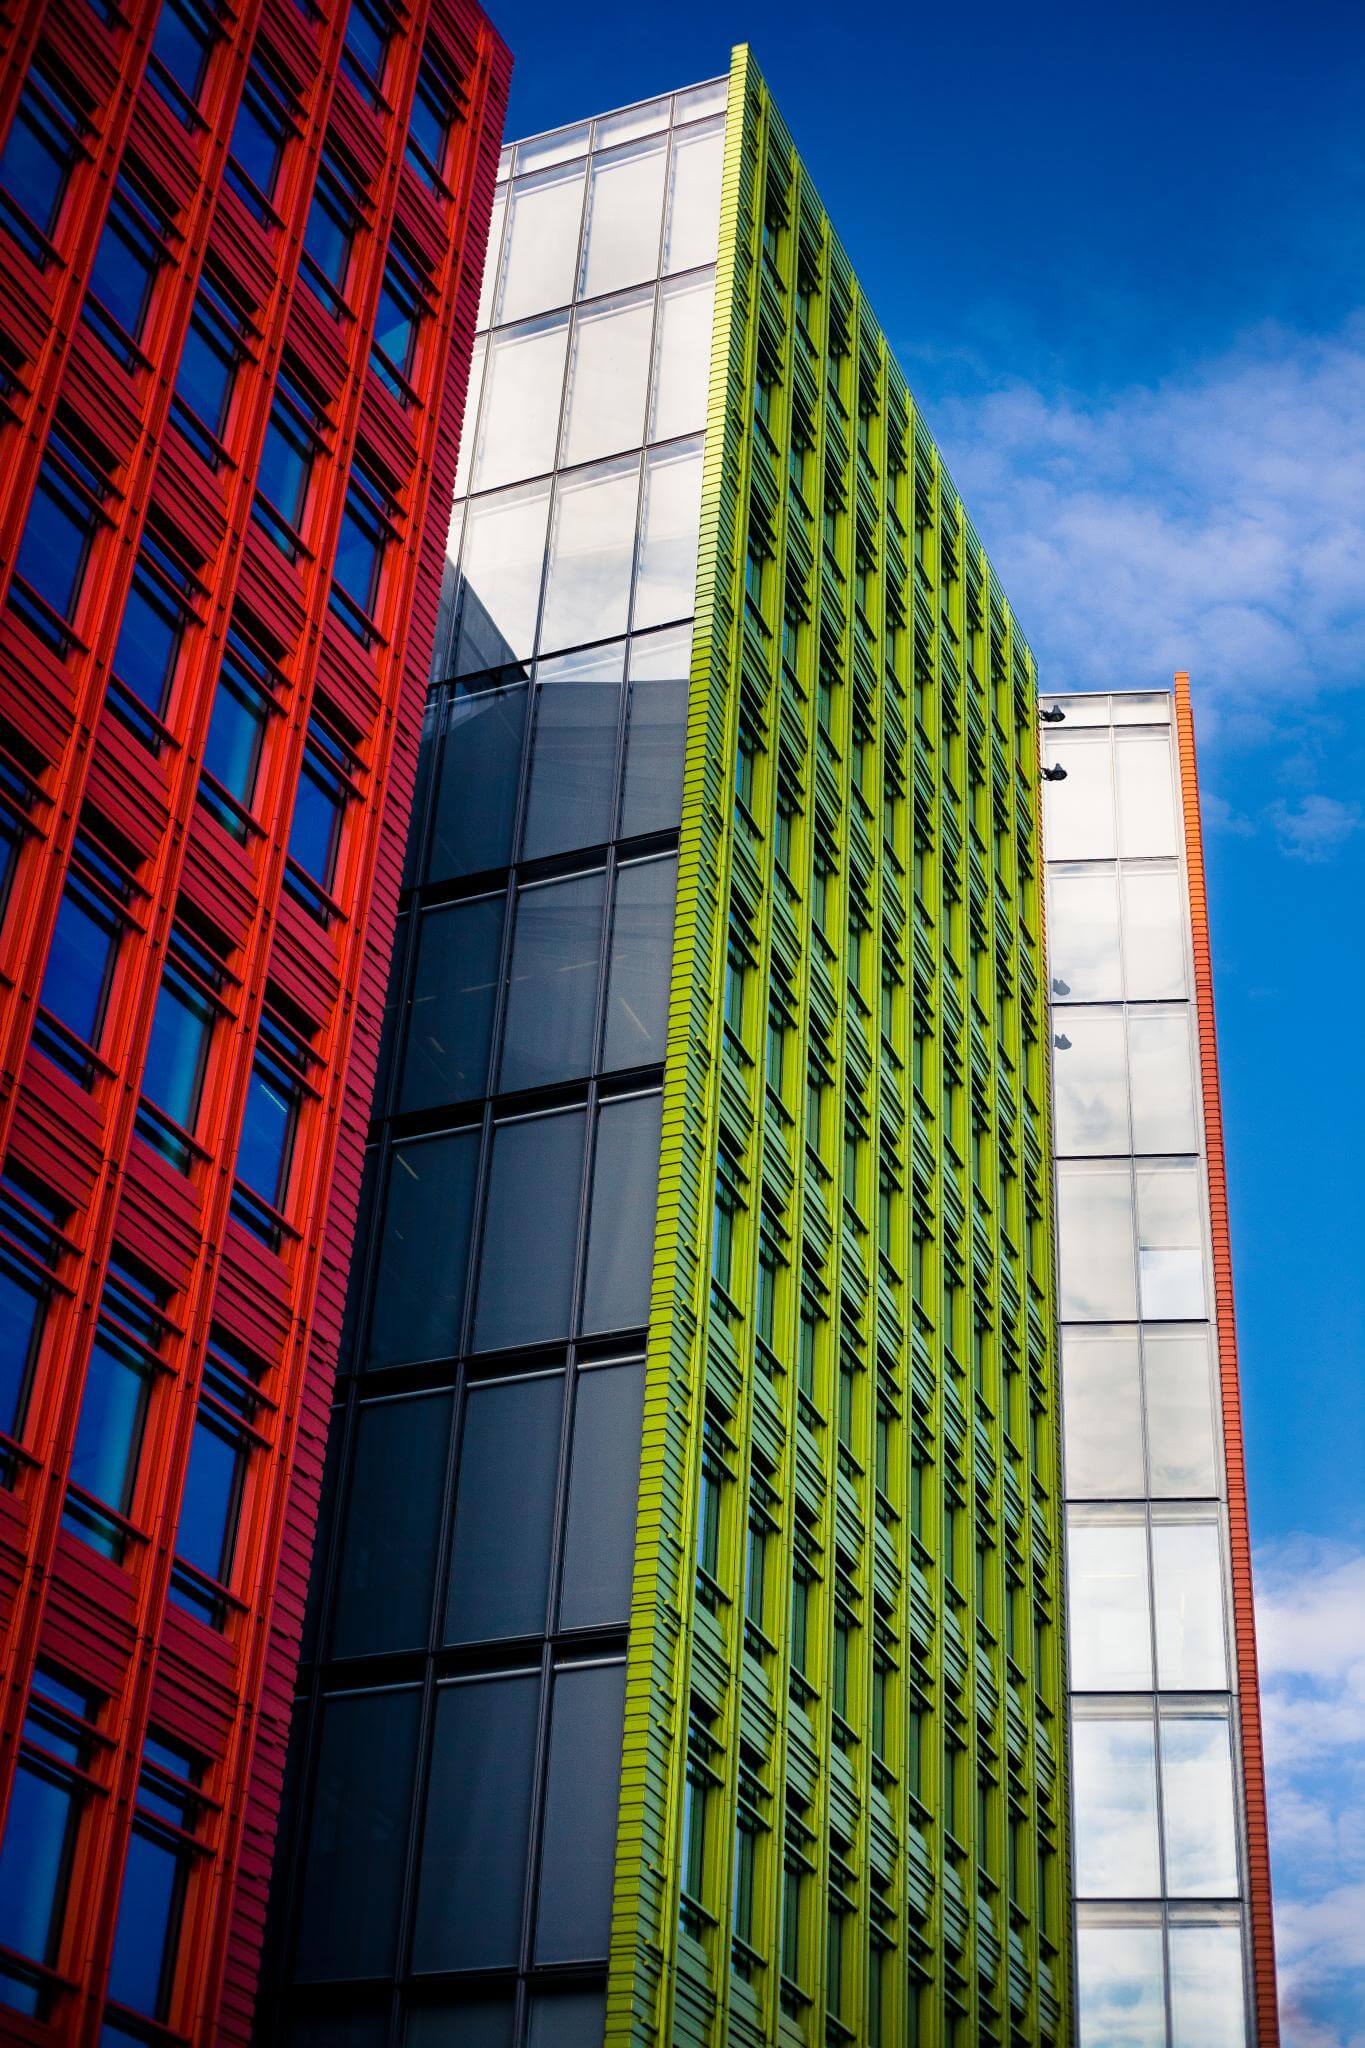 Google acquires Renzo Piano's Central Saint Giles building in London as its new headquarters.